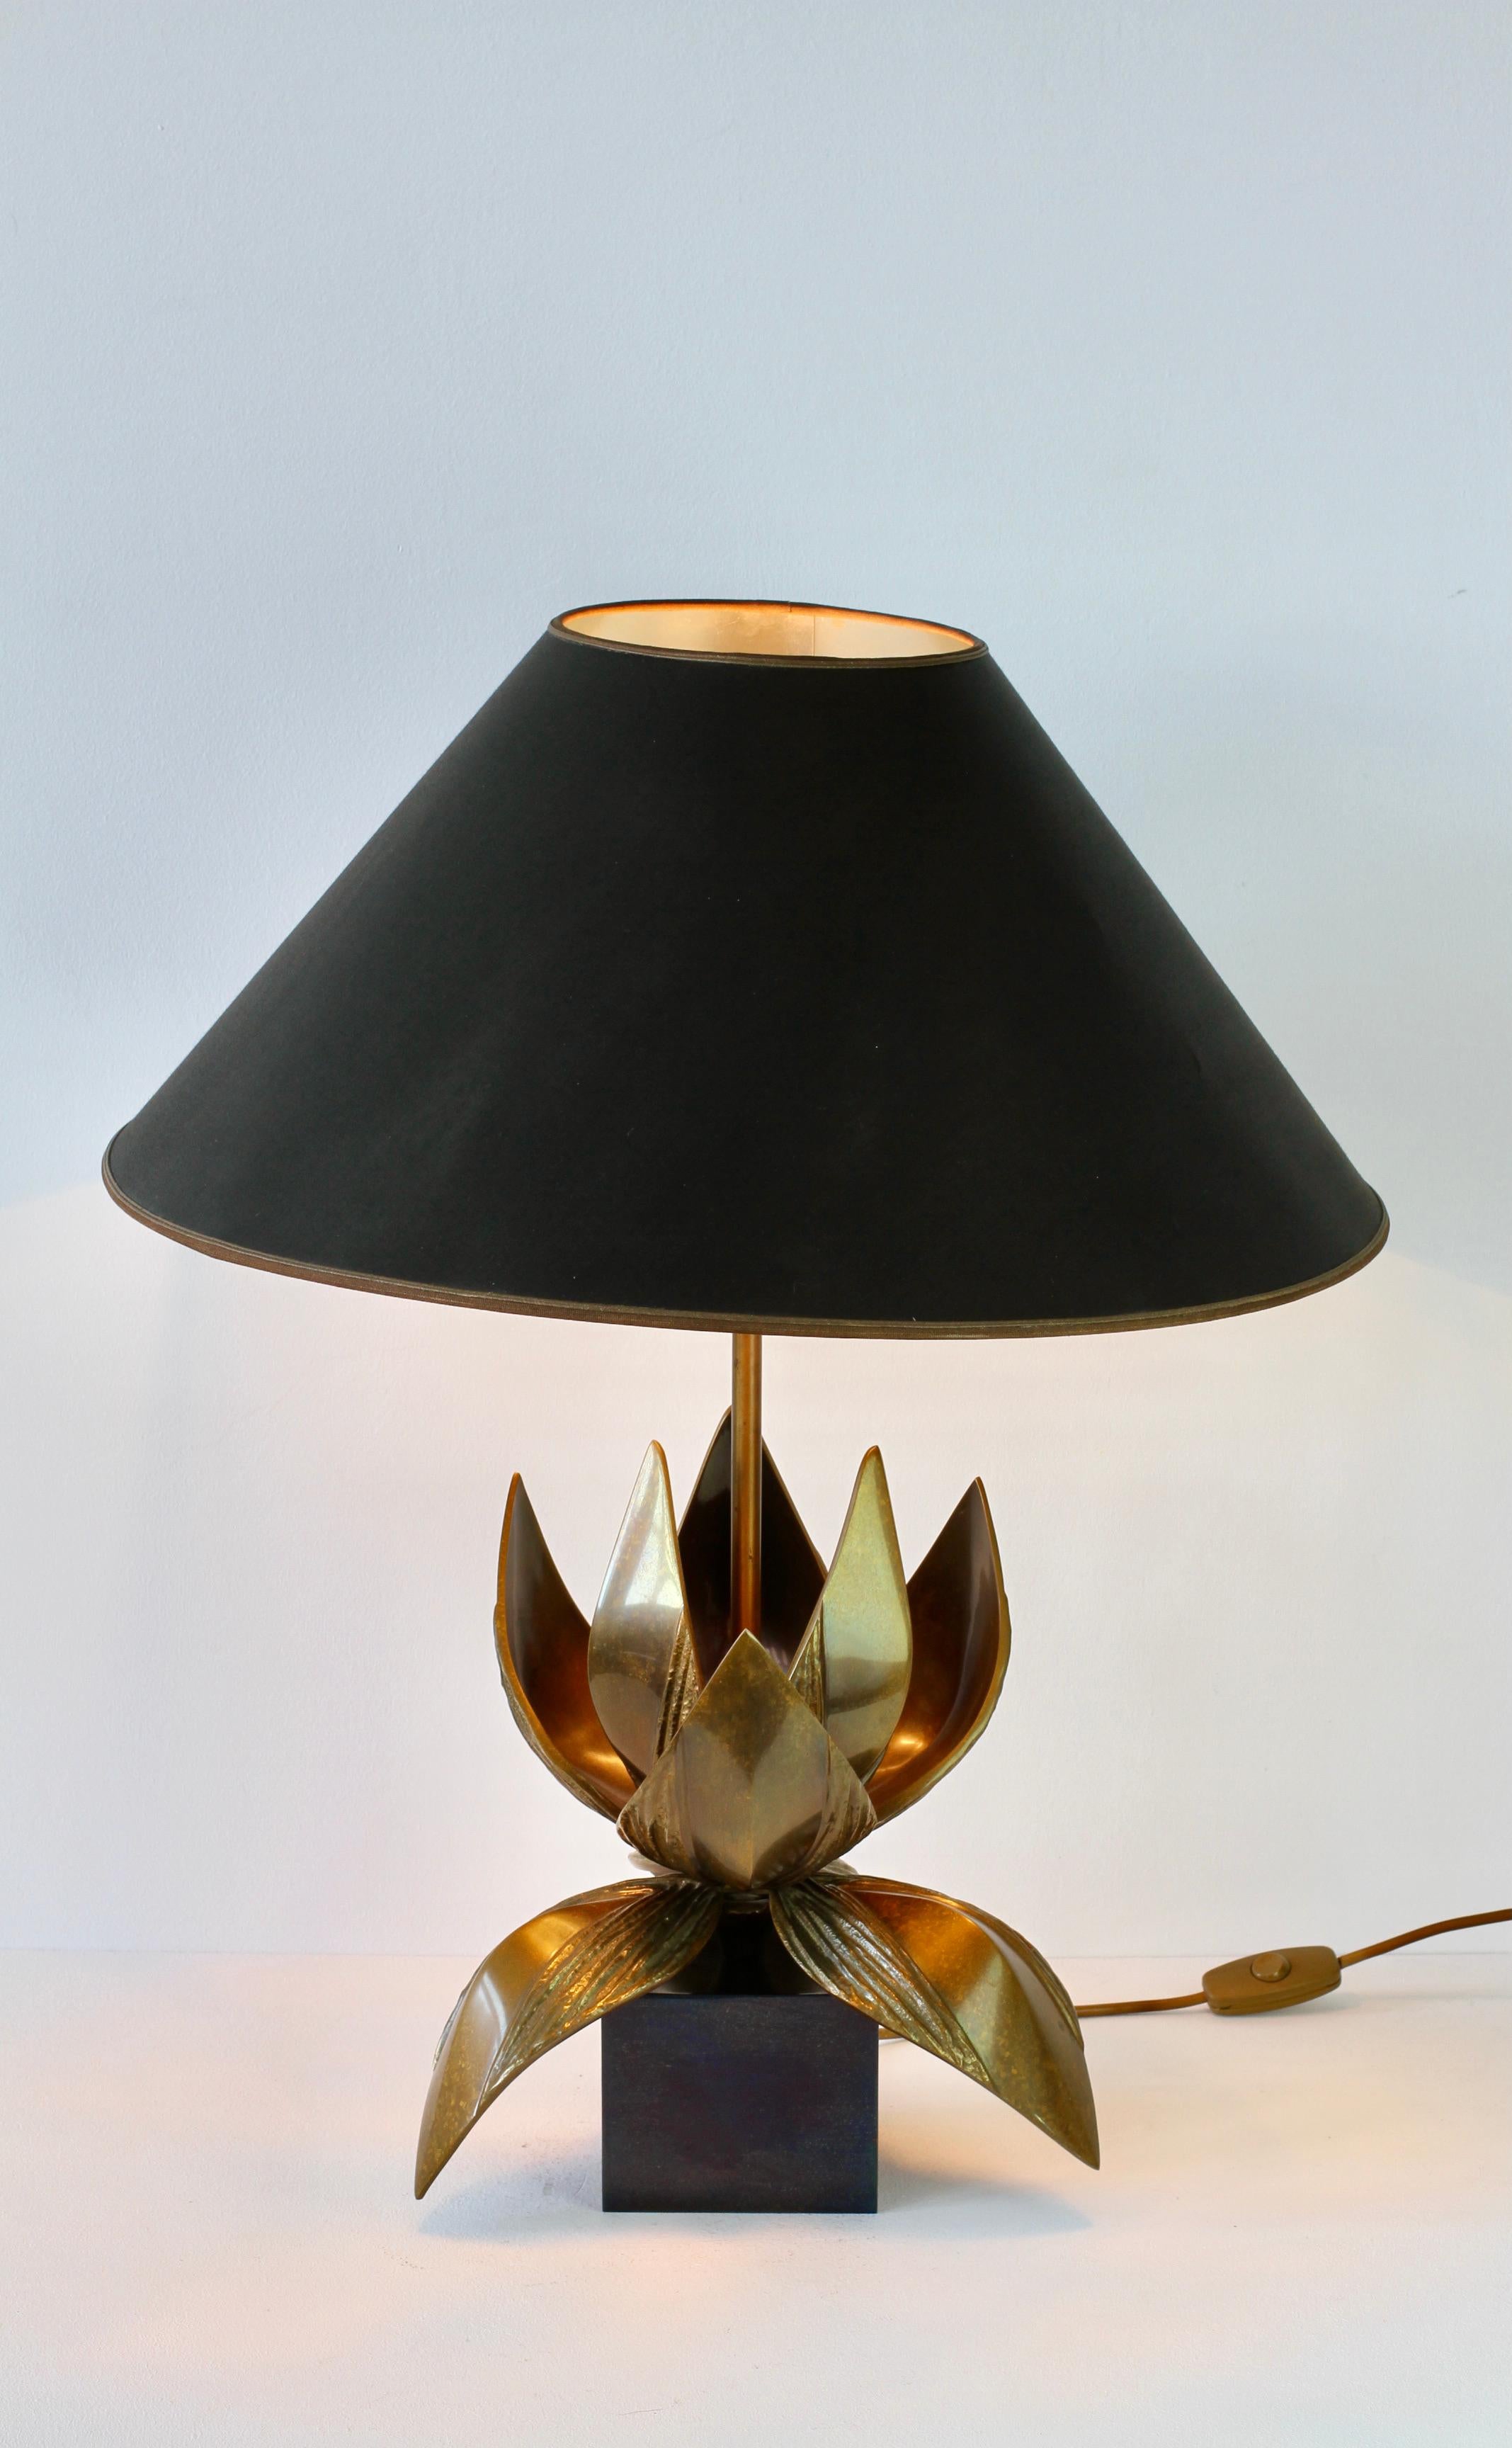 Chrystiane Charles for Maison Charles rare and very large / tall signed cast brass 'Orphee' table lamp on a burnished patinated metal base. Opulent, ornate and decadent, everything you would expect from beautifully crafted French design. Perfect for